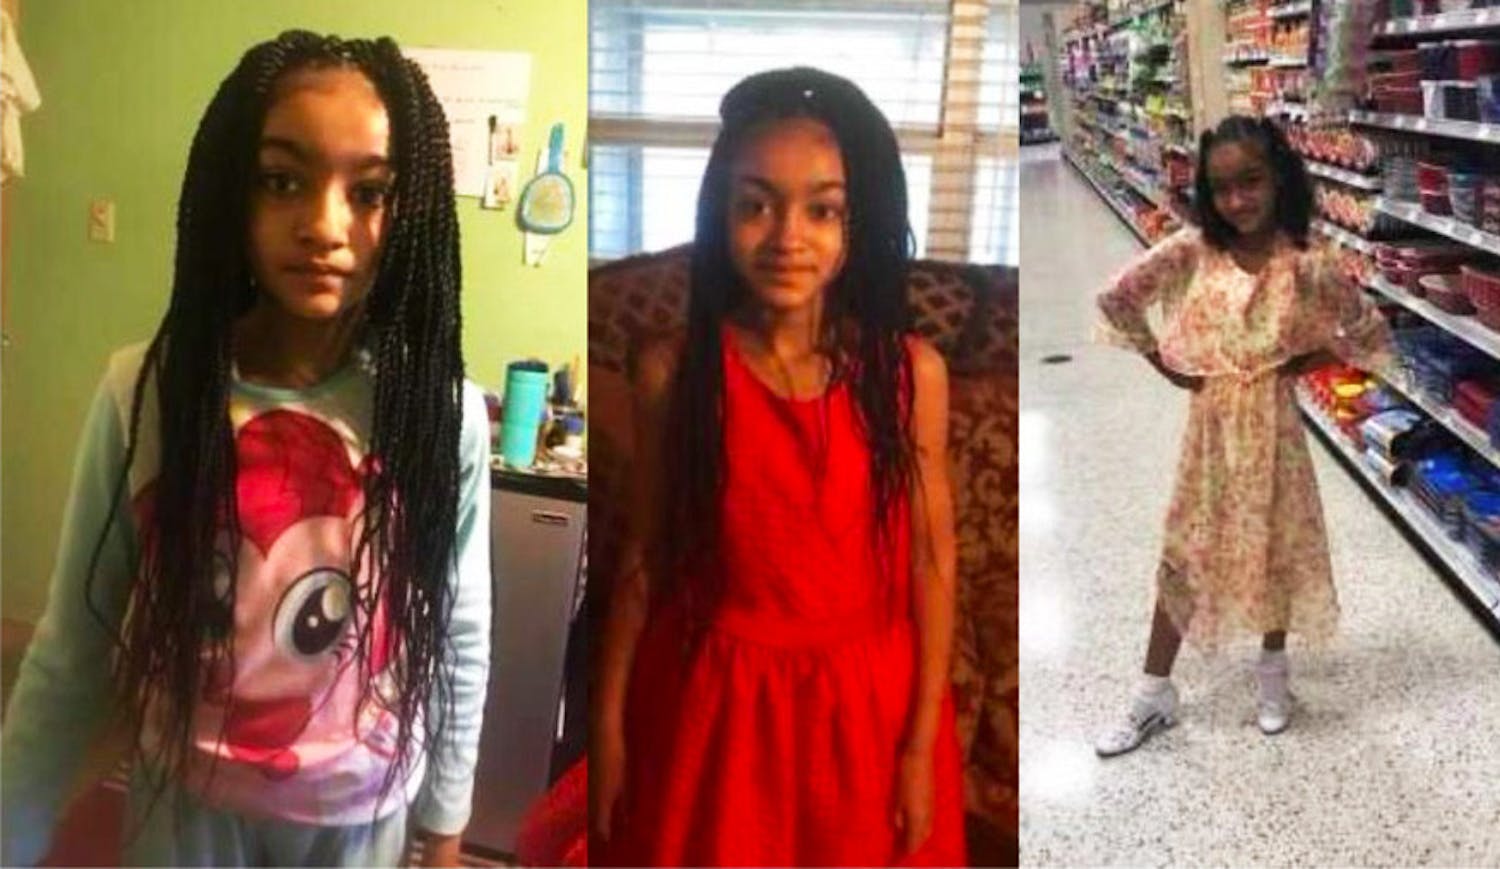 A 13 Year Old Girl S Remains Have Been Found After She Went Missing In Gainesville The Independent Florida Alligator